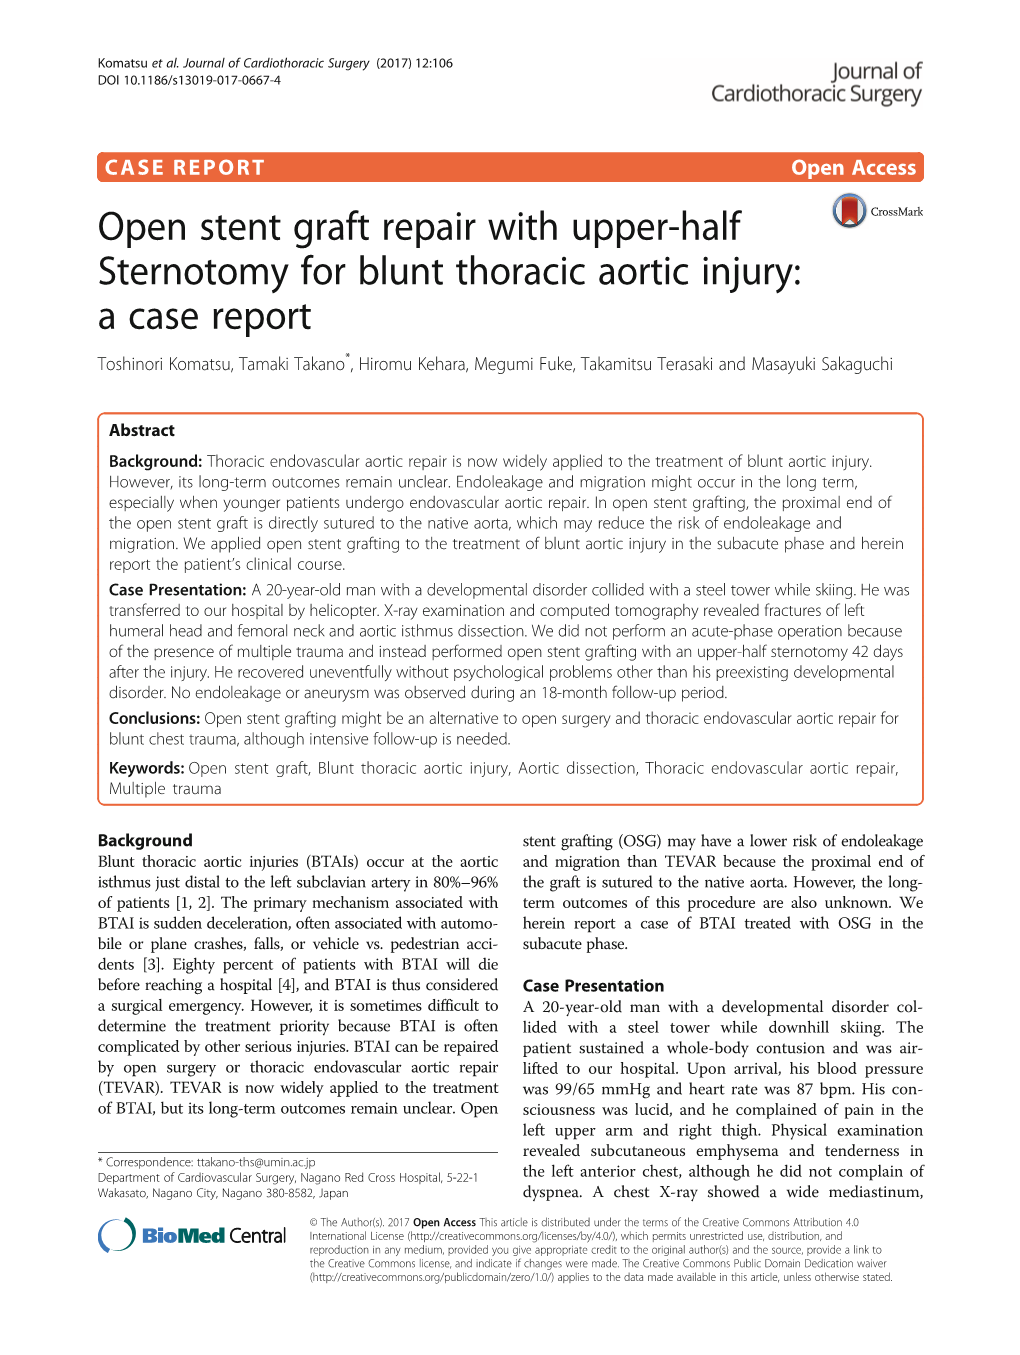 Open Stent Graft Repair with Upper-Half Sternotomy for Blunt Thoracic Aortic